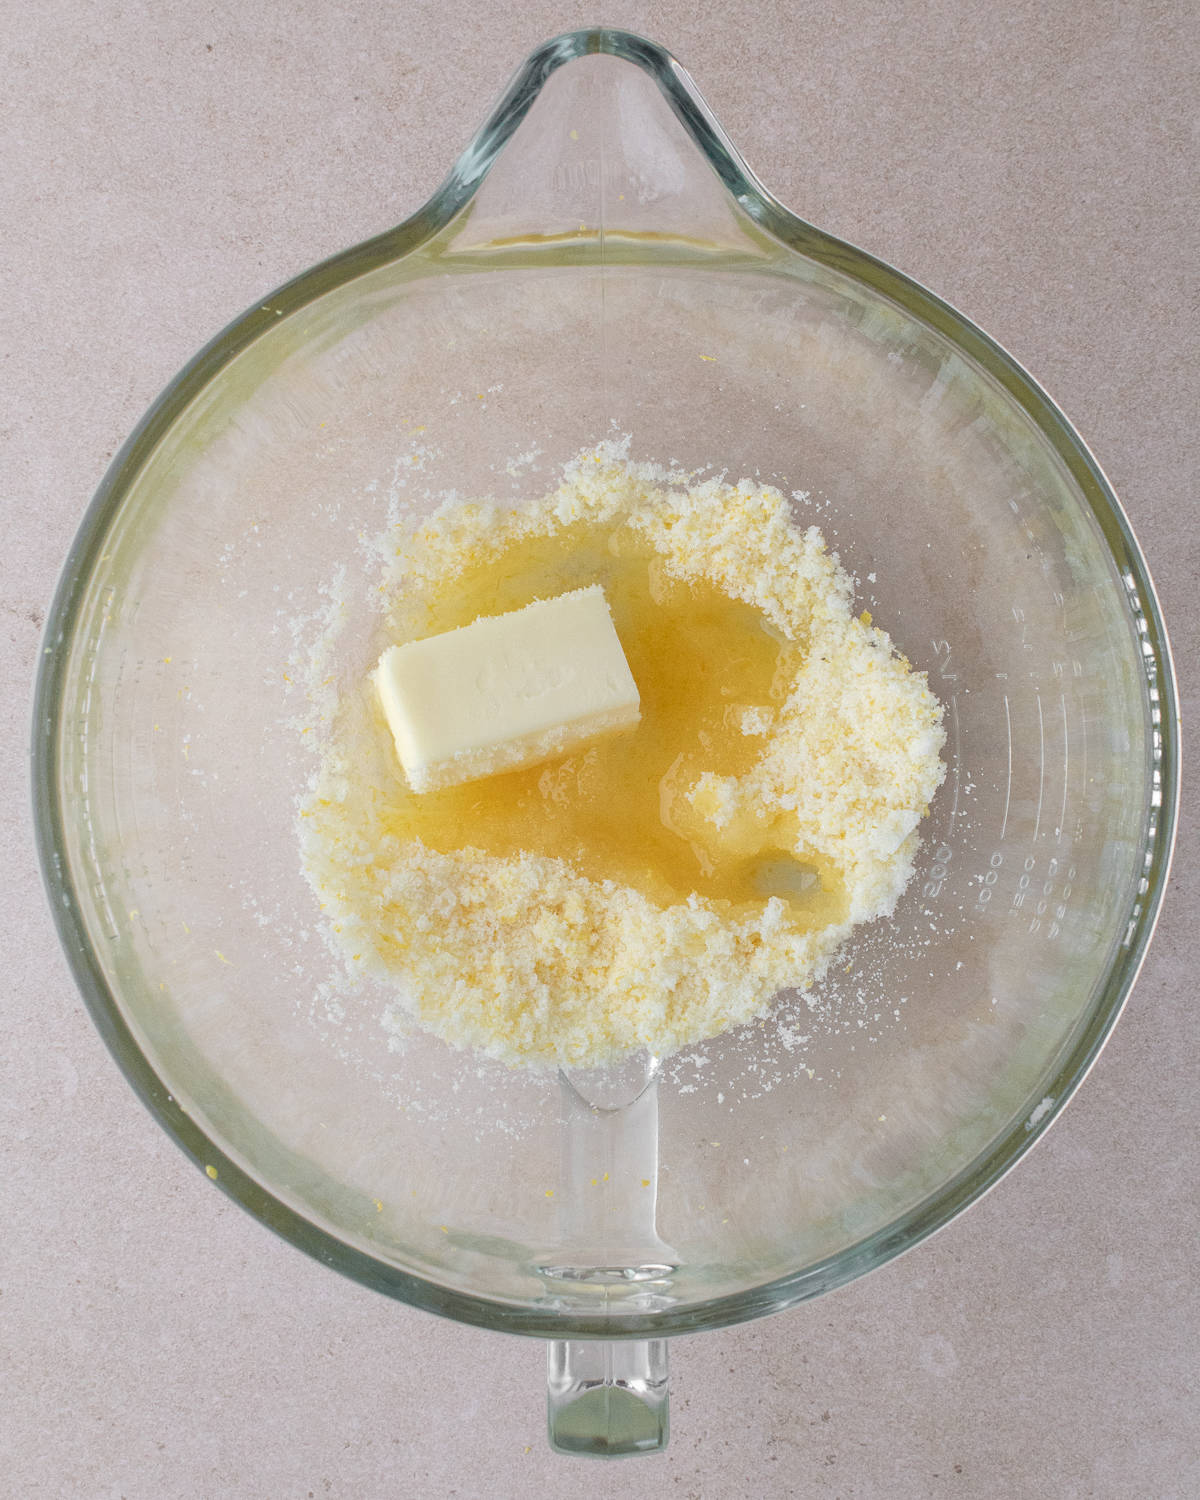 Sugar, lemon zest, butter and oil in a large glass mixing bowl